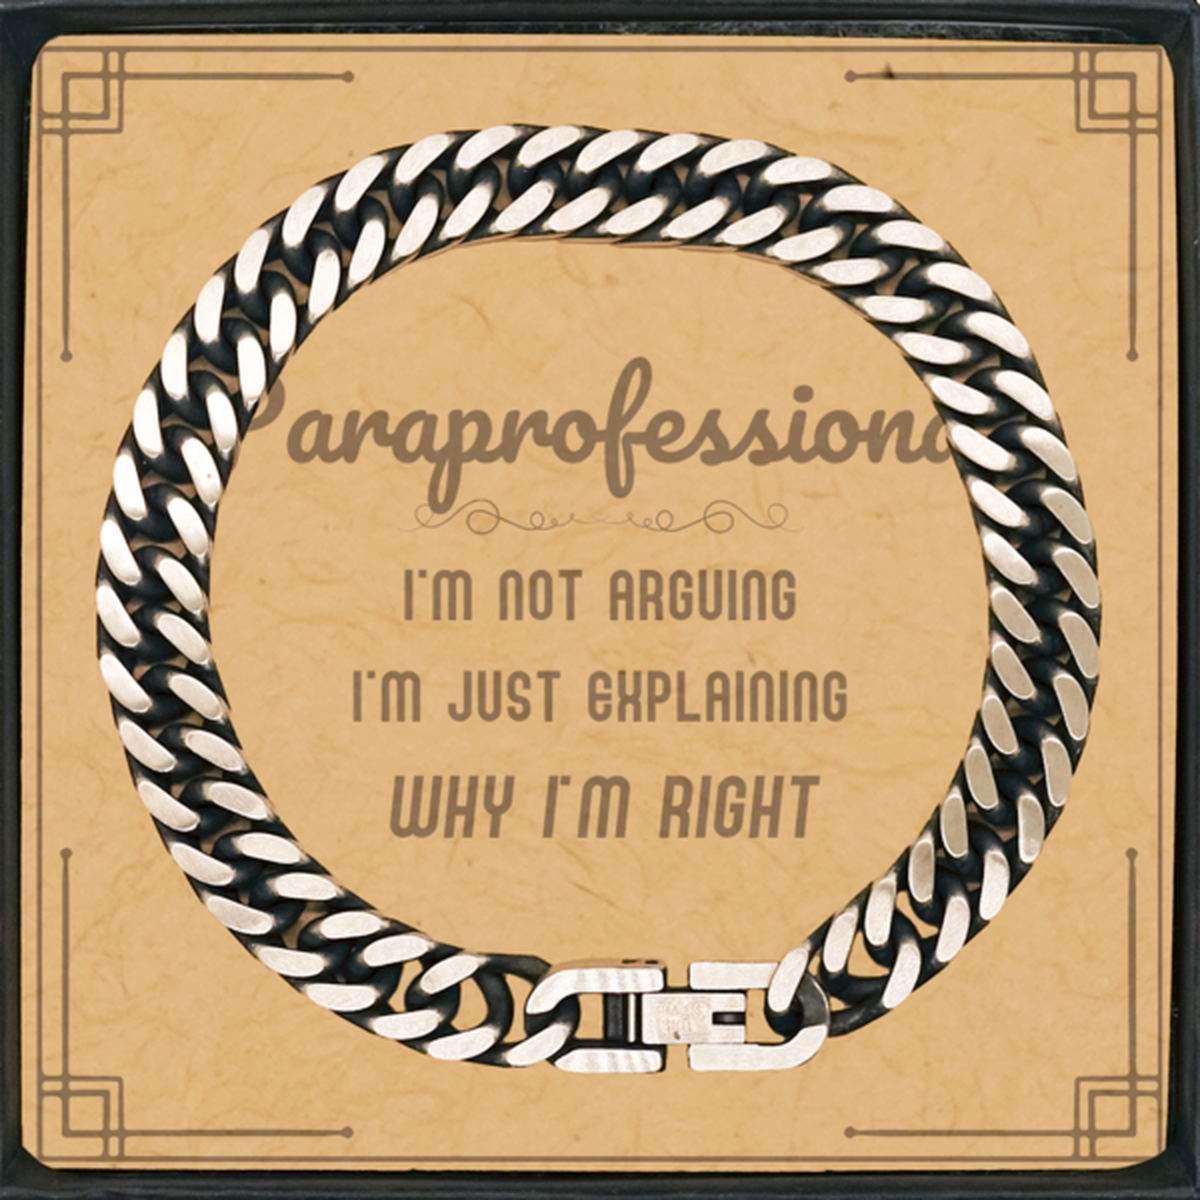 Paraprofessional I'm not Arguing. I'm Just Explaining Why I'm RIGHT Cuban Link Chain Bracelet, Funny Saying Quote Paraprofessional Gifts For Paraprofessional Message Card Graduation Birthday Christmas Gifts for Men Women Coworker